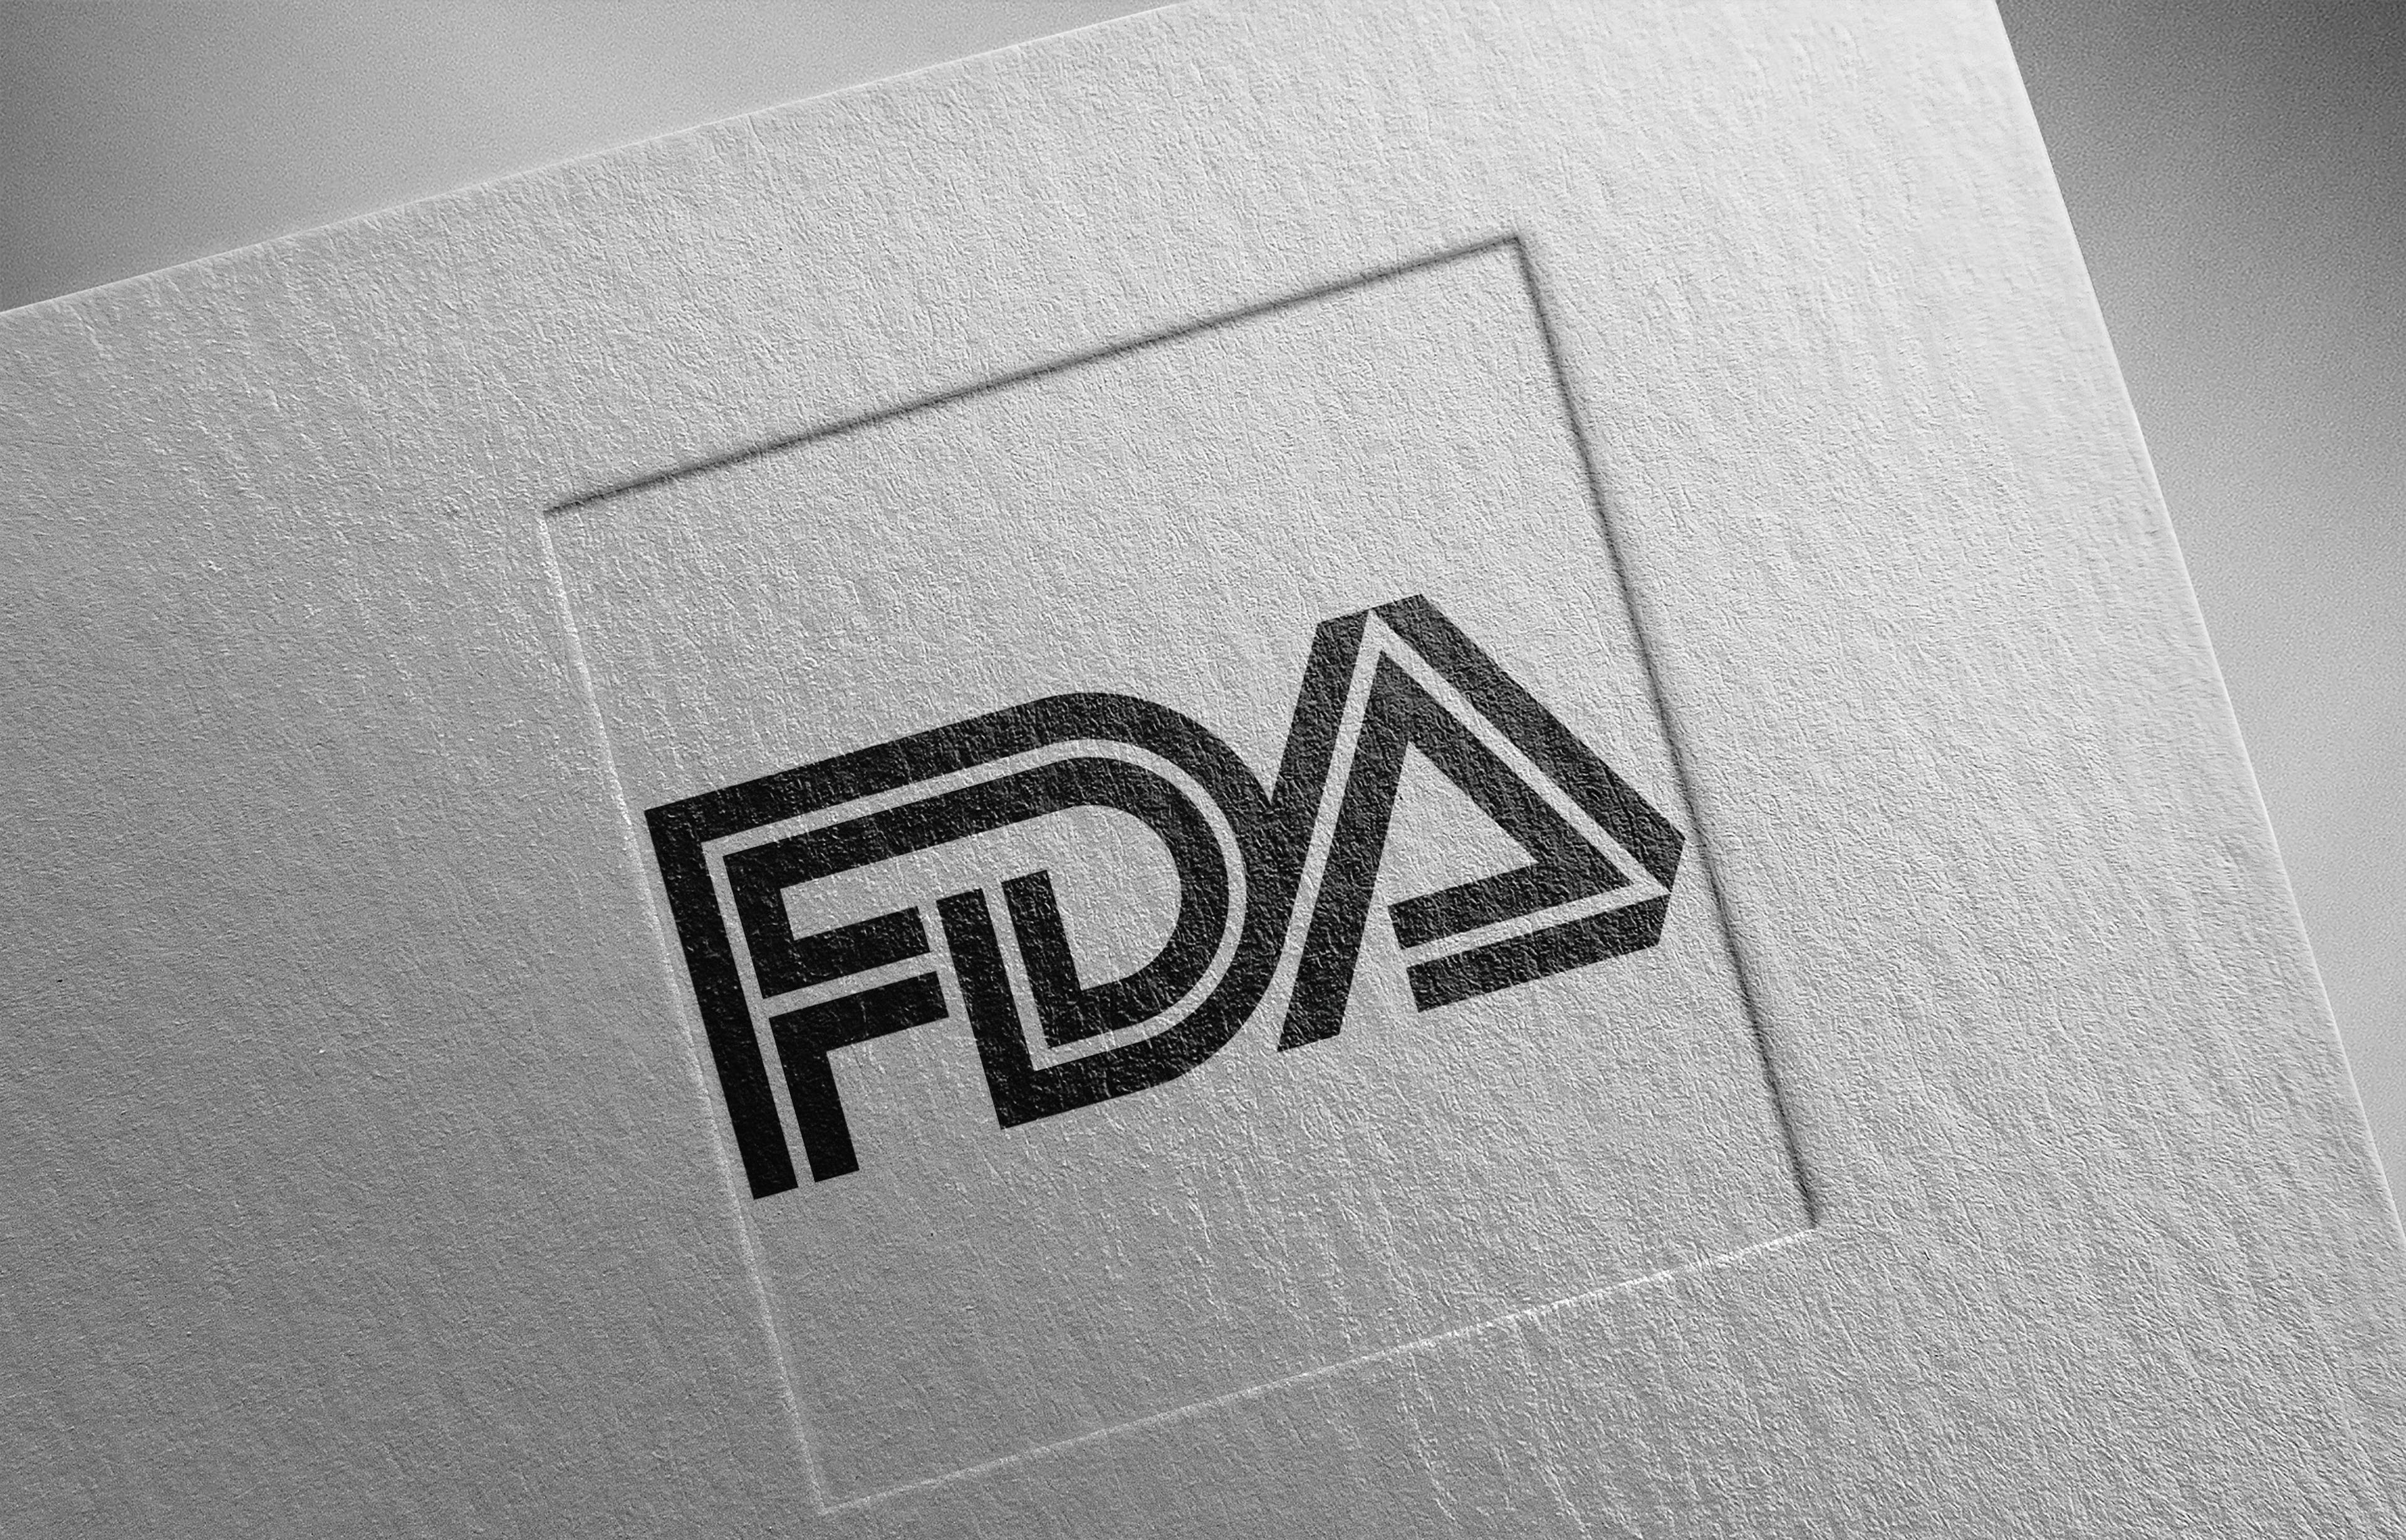 an image of the FDA logo on a grey background.